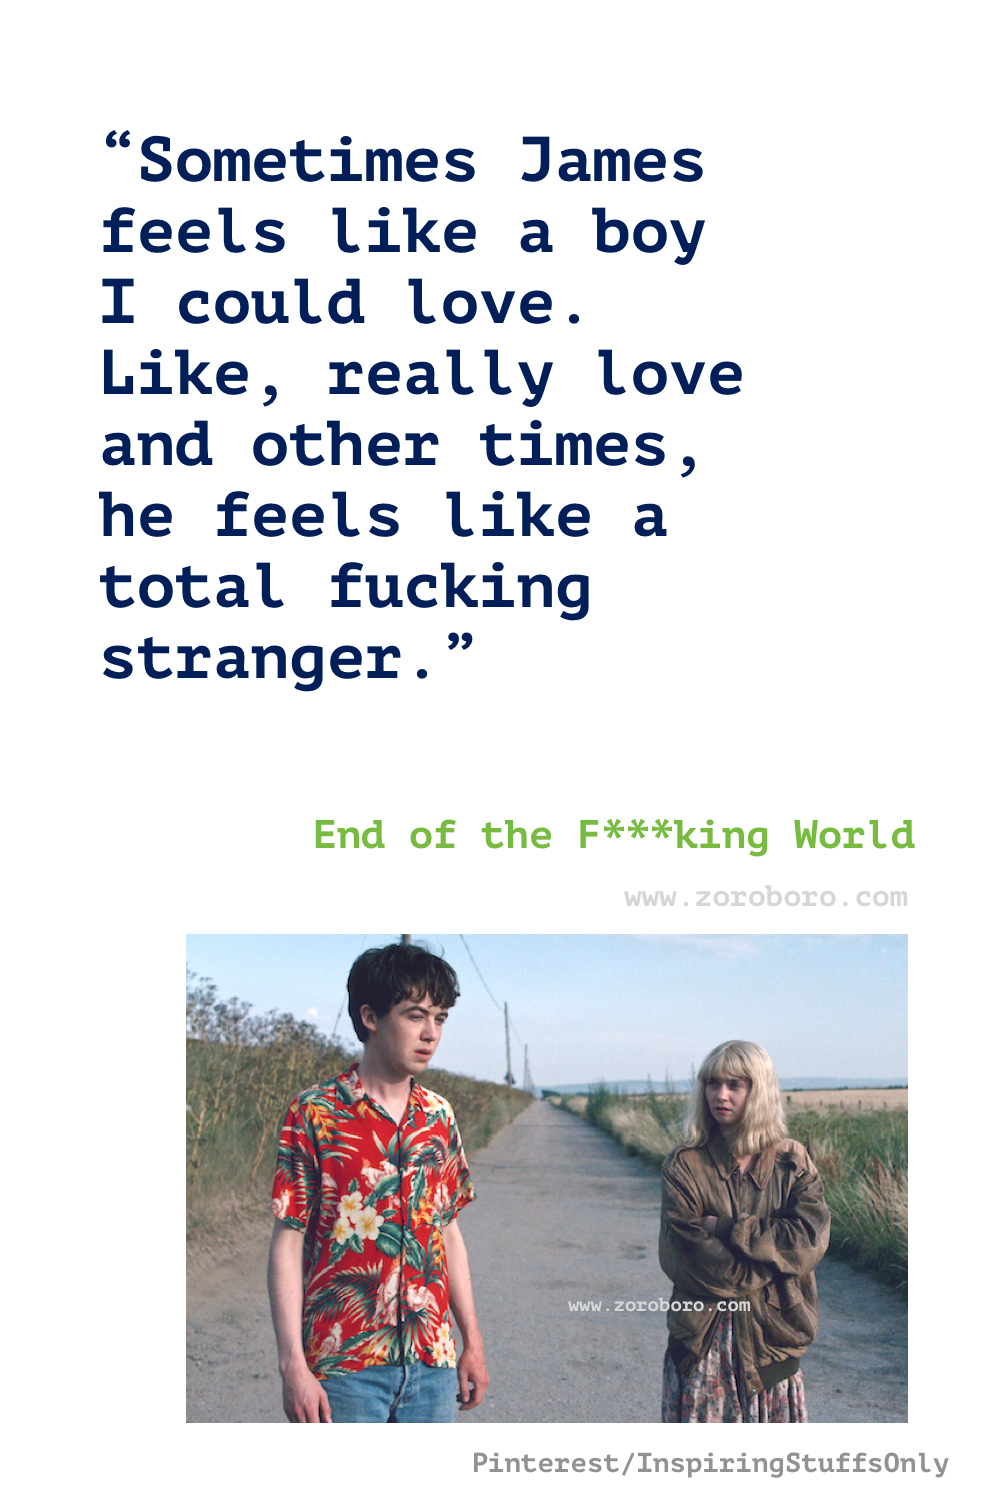 The End of the F***ing World Quotes, The End of the F***ing World T.V SHOW/SERIES Quotes. James & Alyssa Dialogues/Scenes. The End of the F***ing World Quotes.  The End of the F***ing World Season 1, 2 &3 Quotes.